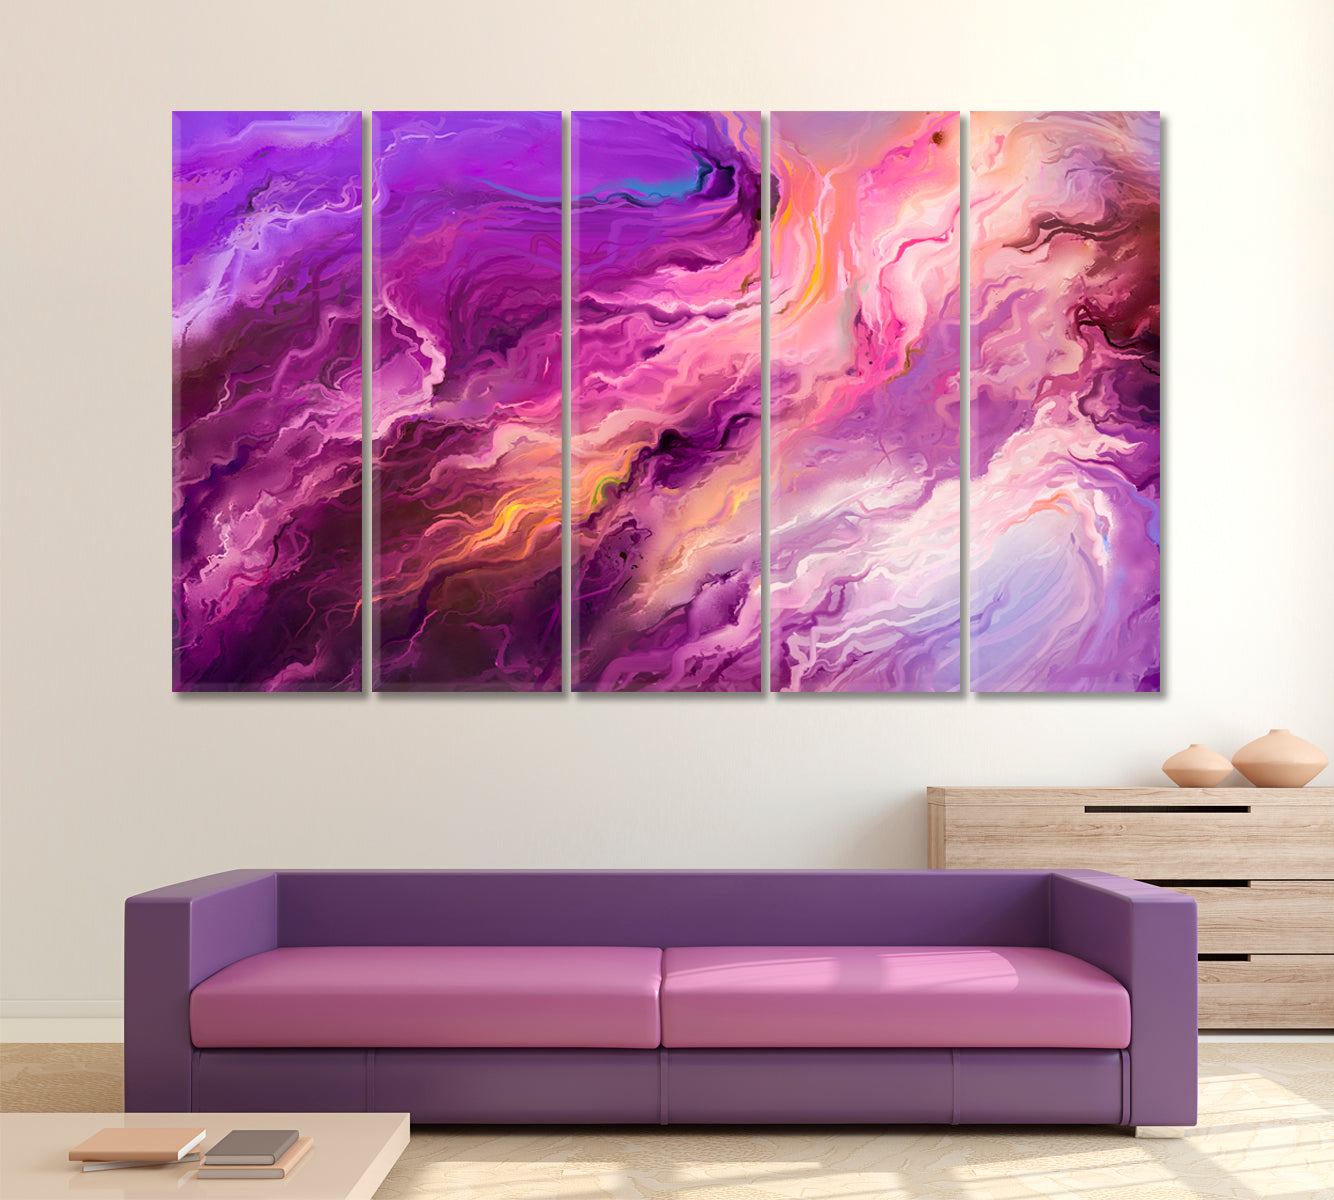 Abstract Contemporary Floating Swirls Abstract Art Print Artesty 5 panels 36" x 24" 